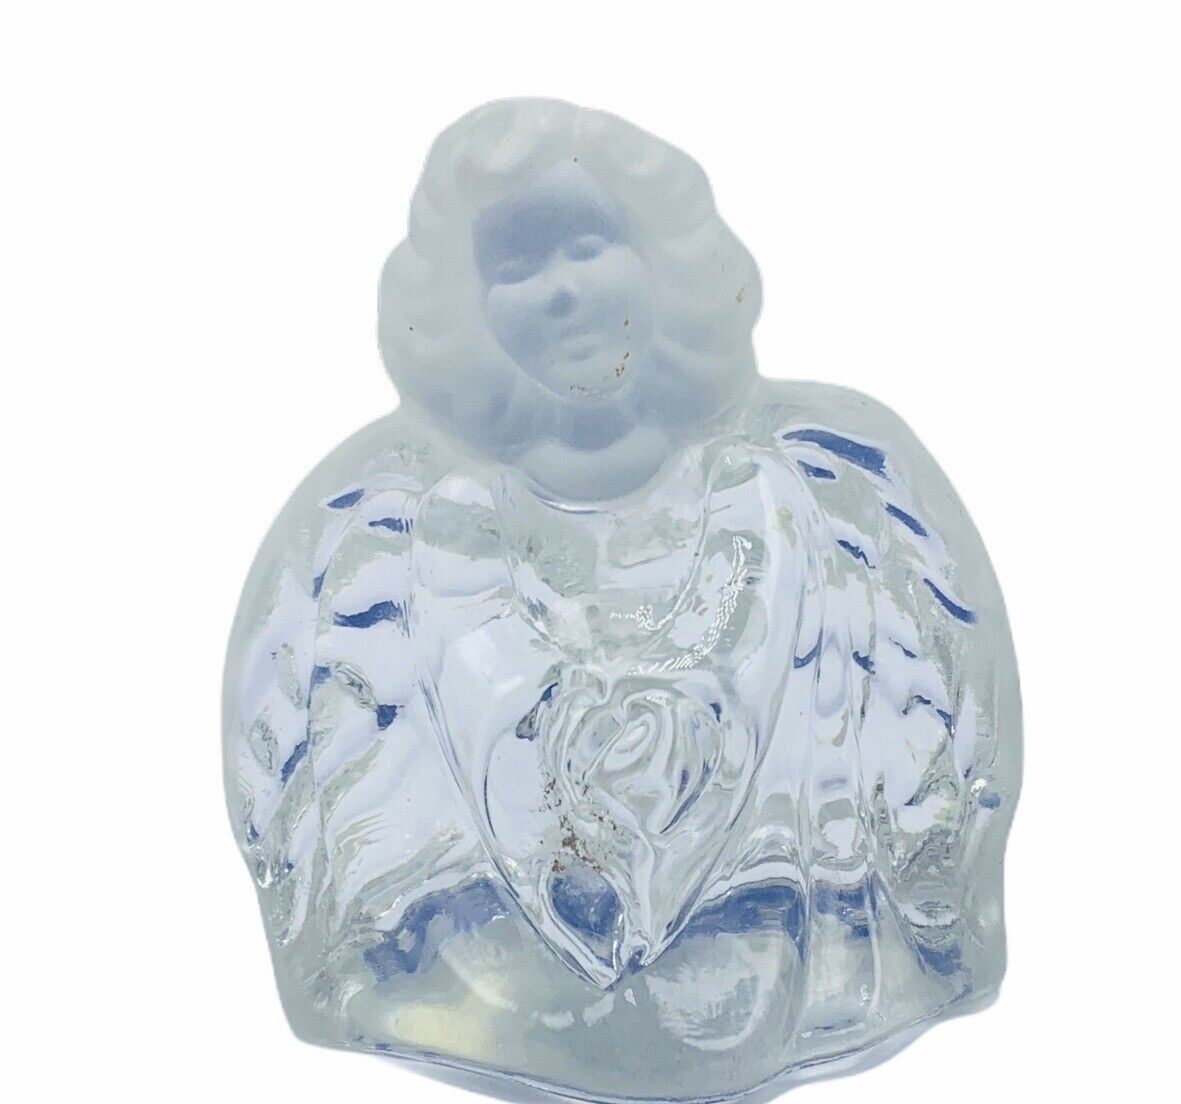 Primary image for Fenton art glass figurine vtg Christmas angel sculpture praying clear opalescent